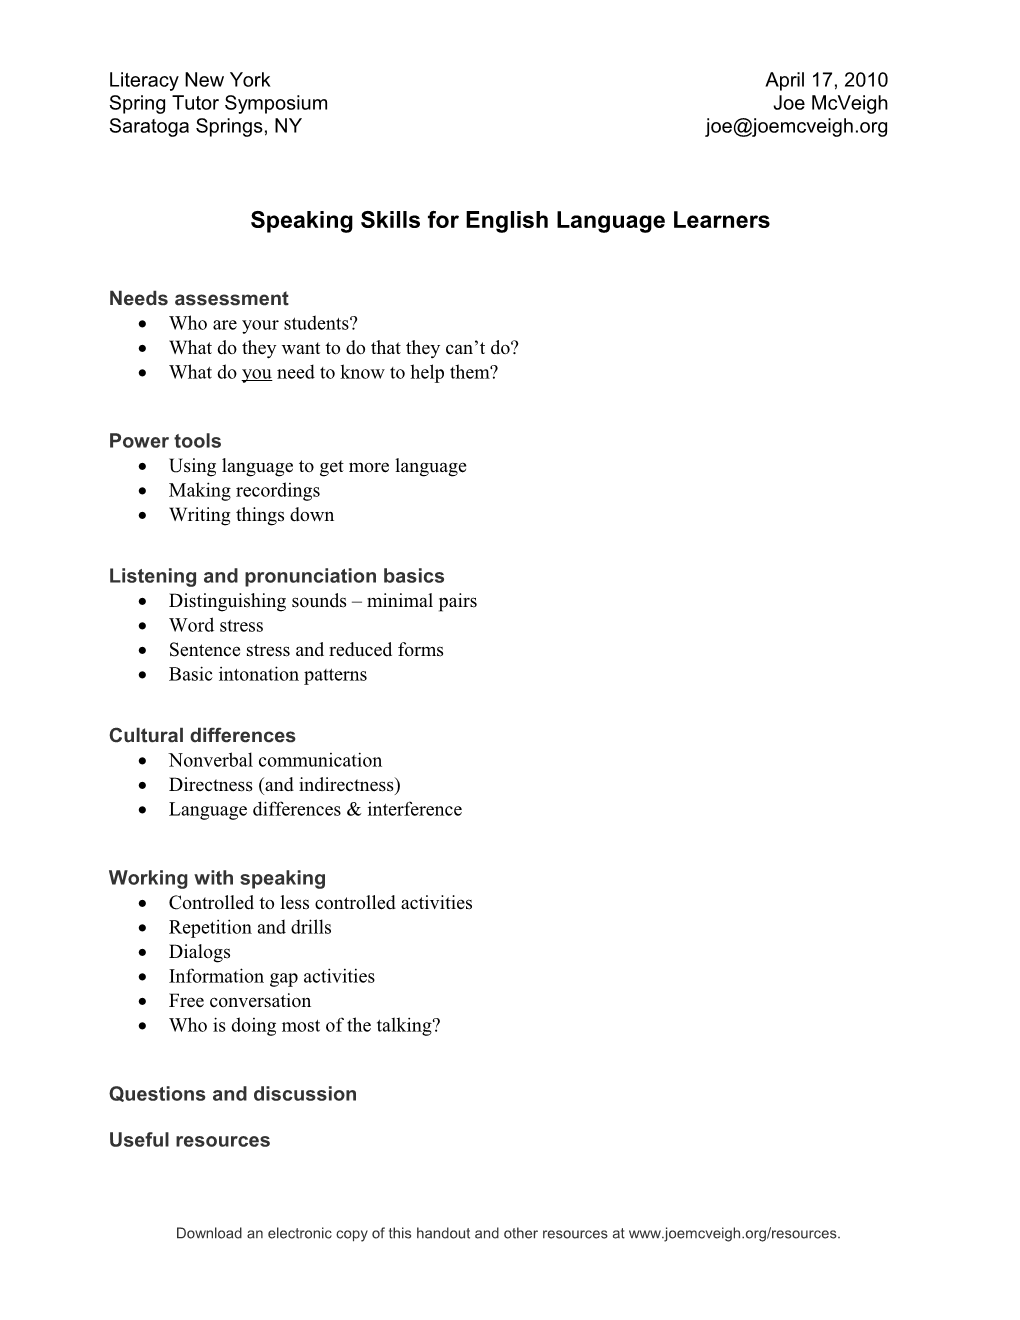 Speaking Skills for English Language Learners